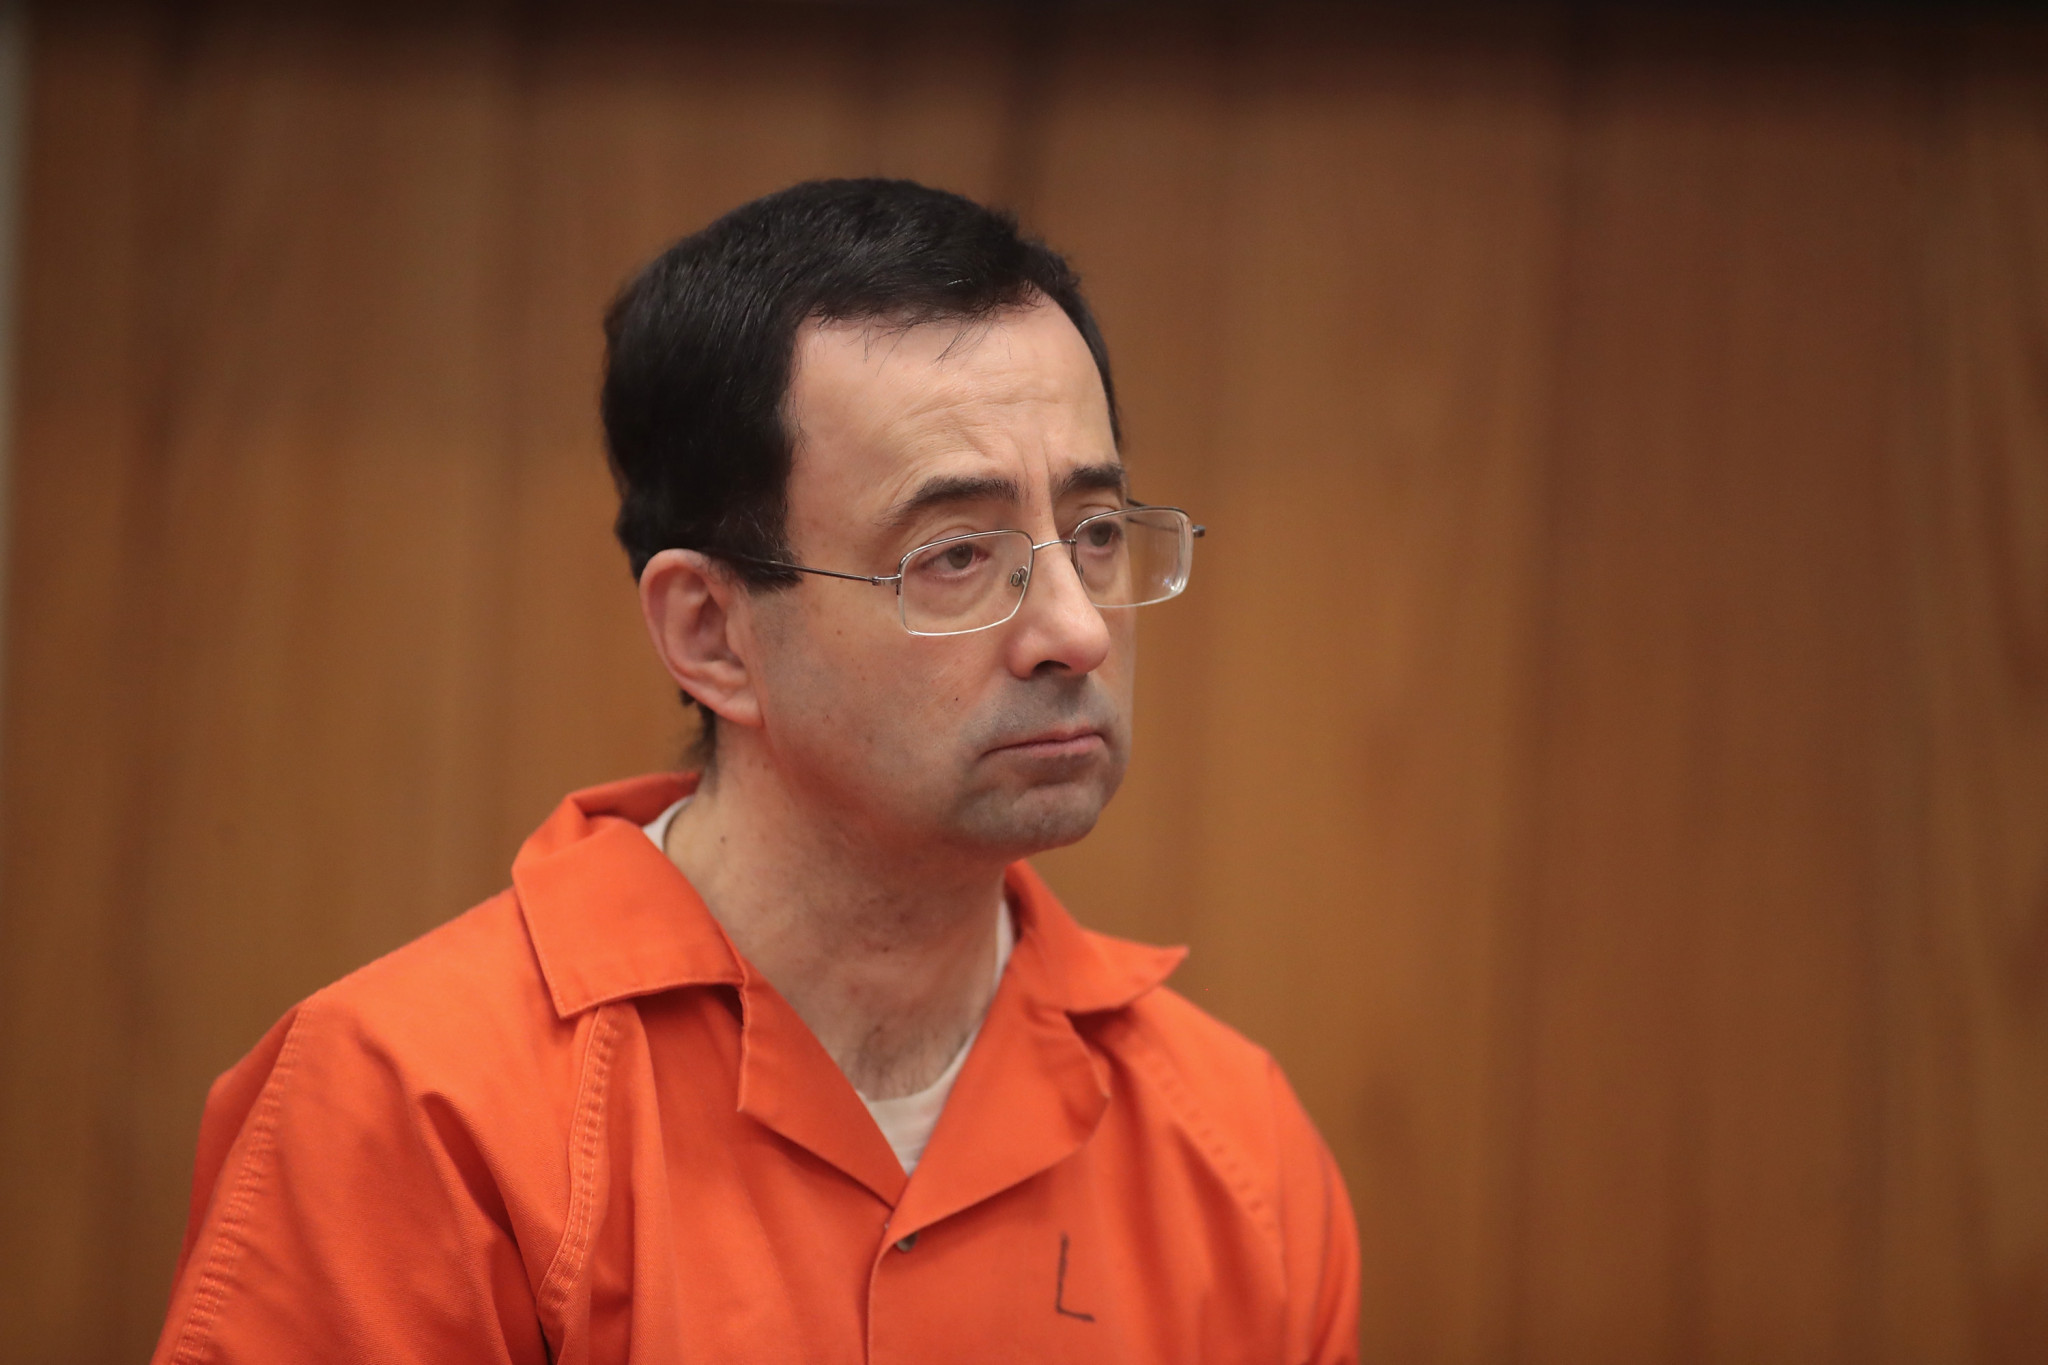 USA Gymnastics is looking to recover from the Larry Nassar scandal ©Getty Images